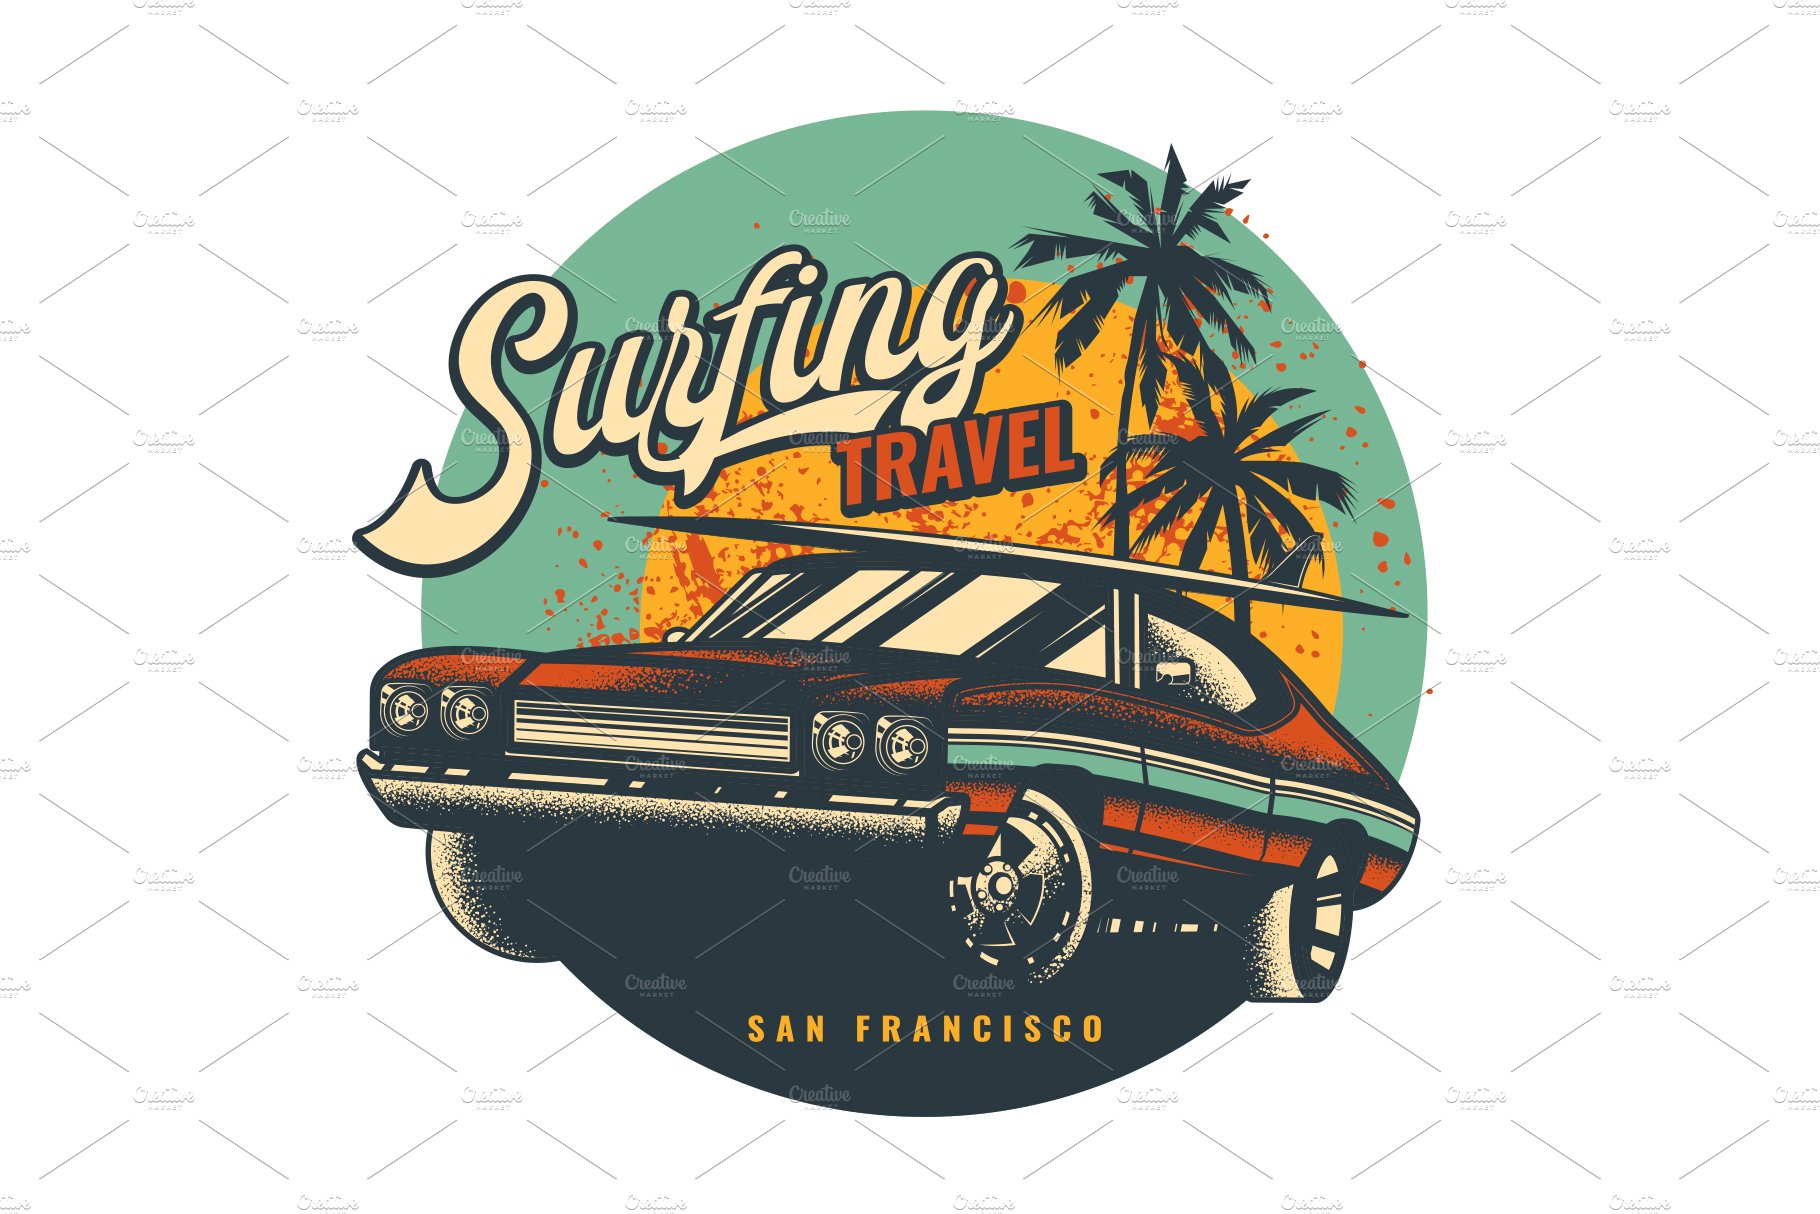 CAR AND SURF SUMMER T-SHIRT DESIGN cover image.